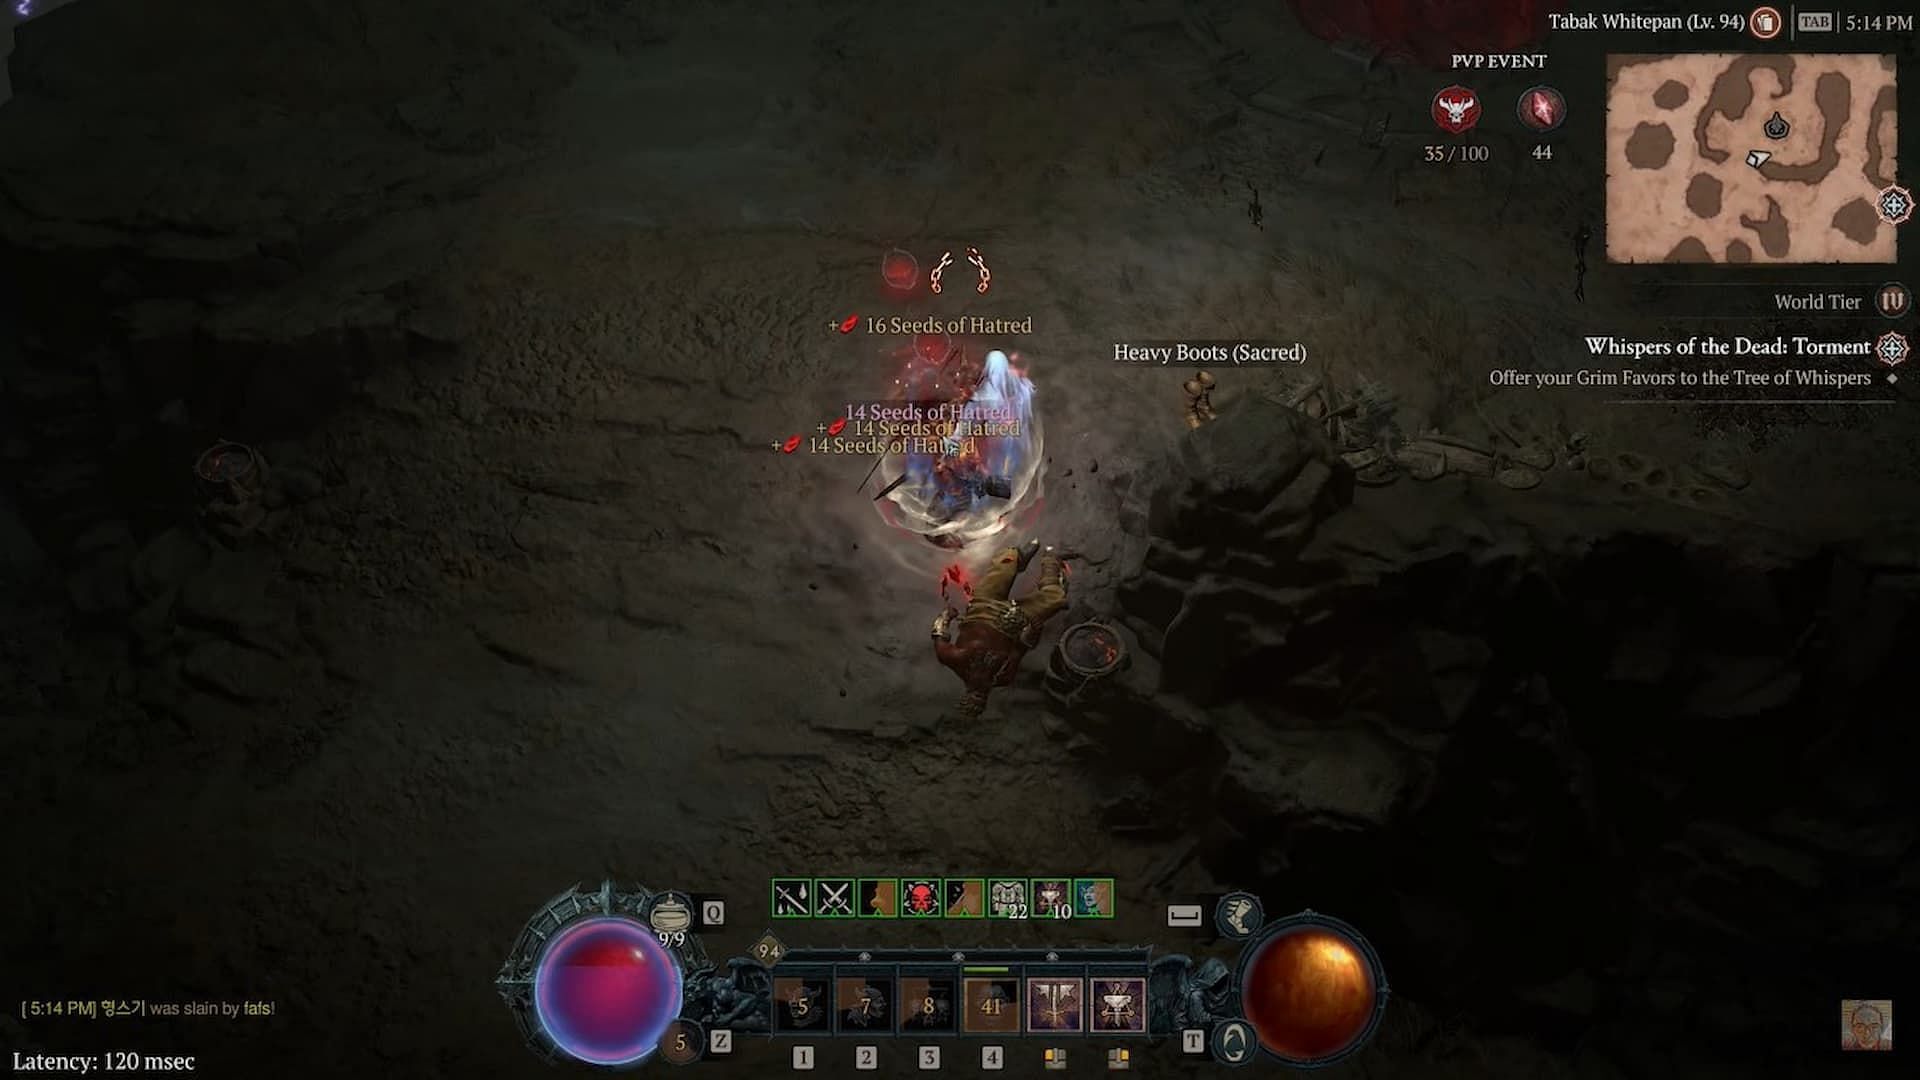 Seeds of Hatred can be obtained through killing monsters in Diablo 4 (Image via Blizzard Entertainment)